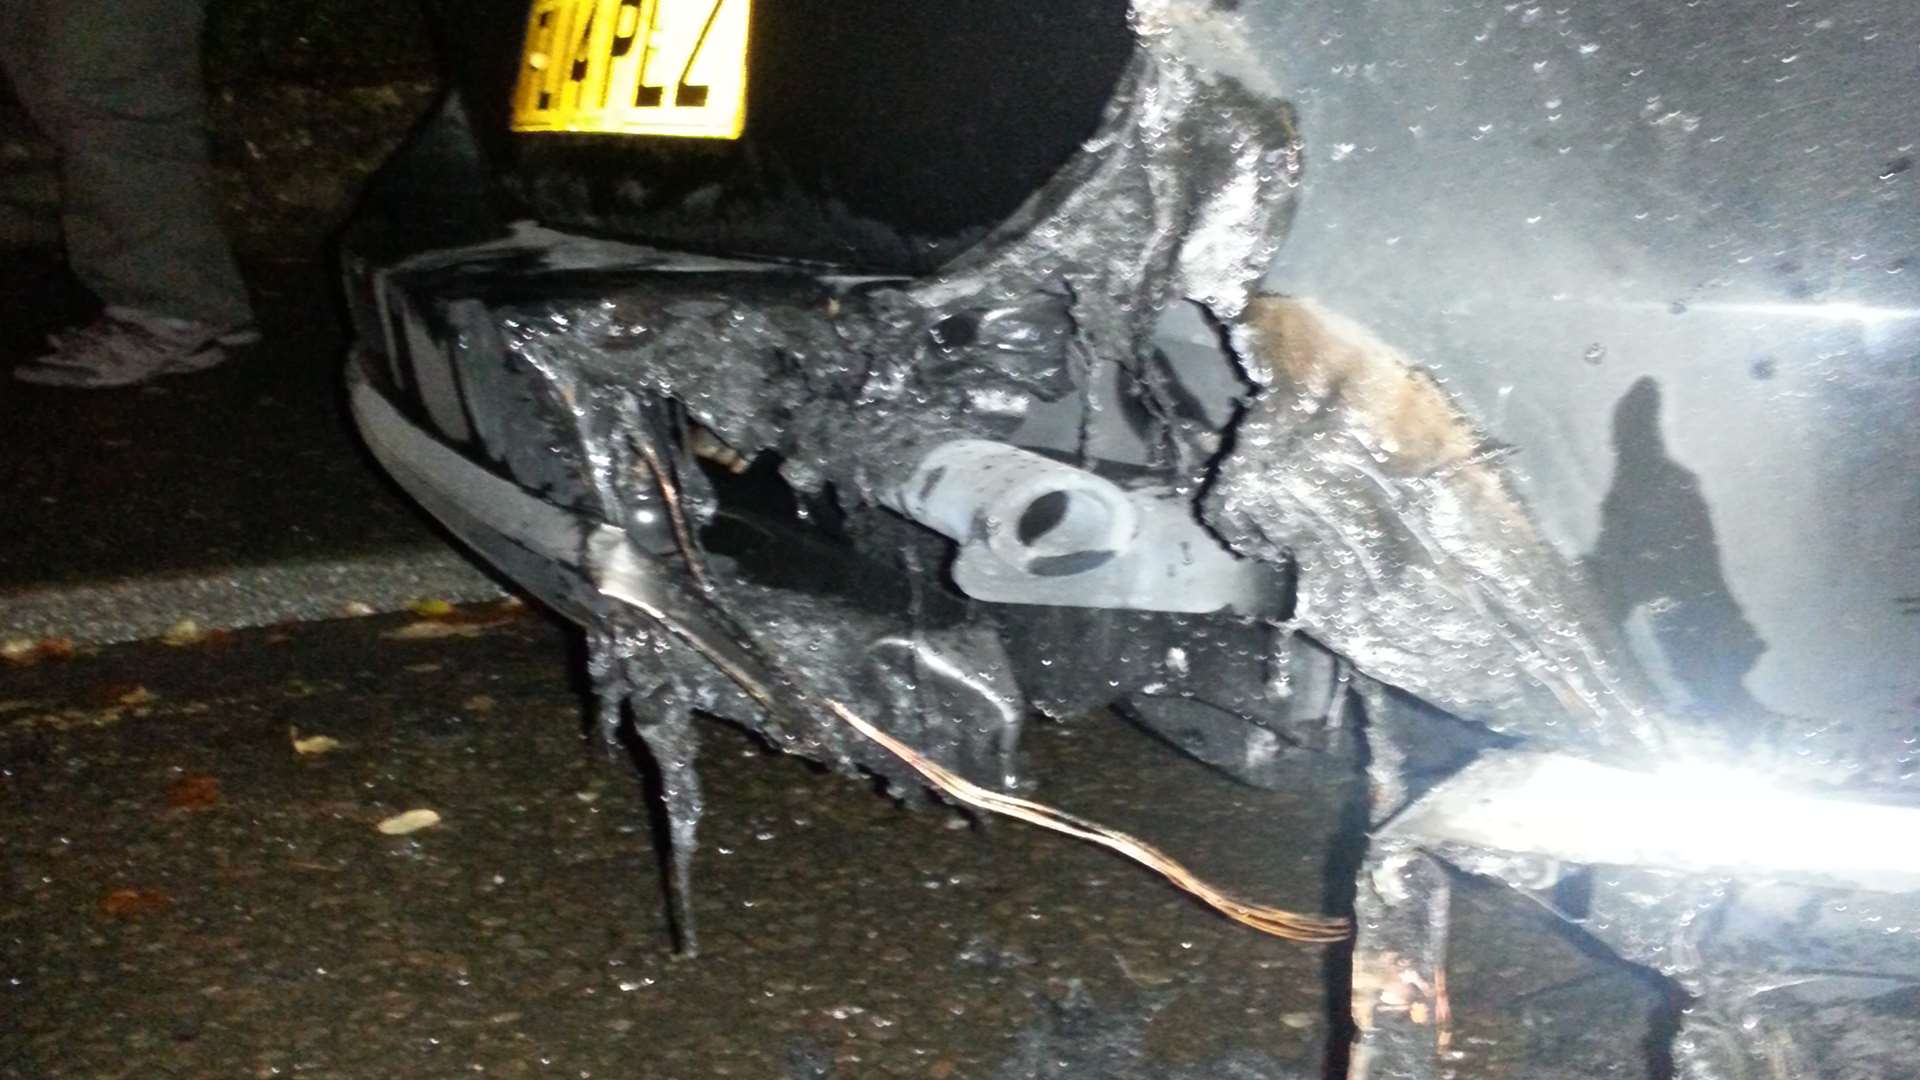 The damage caused to the car